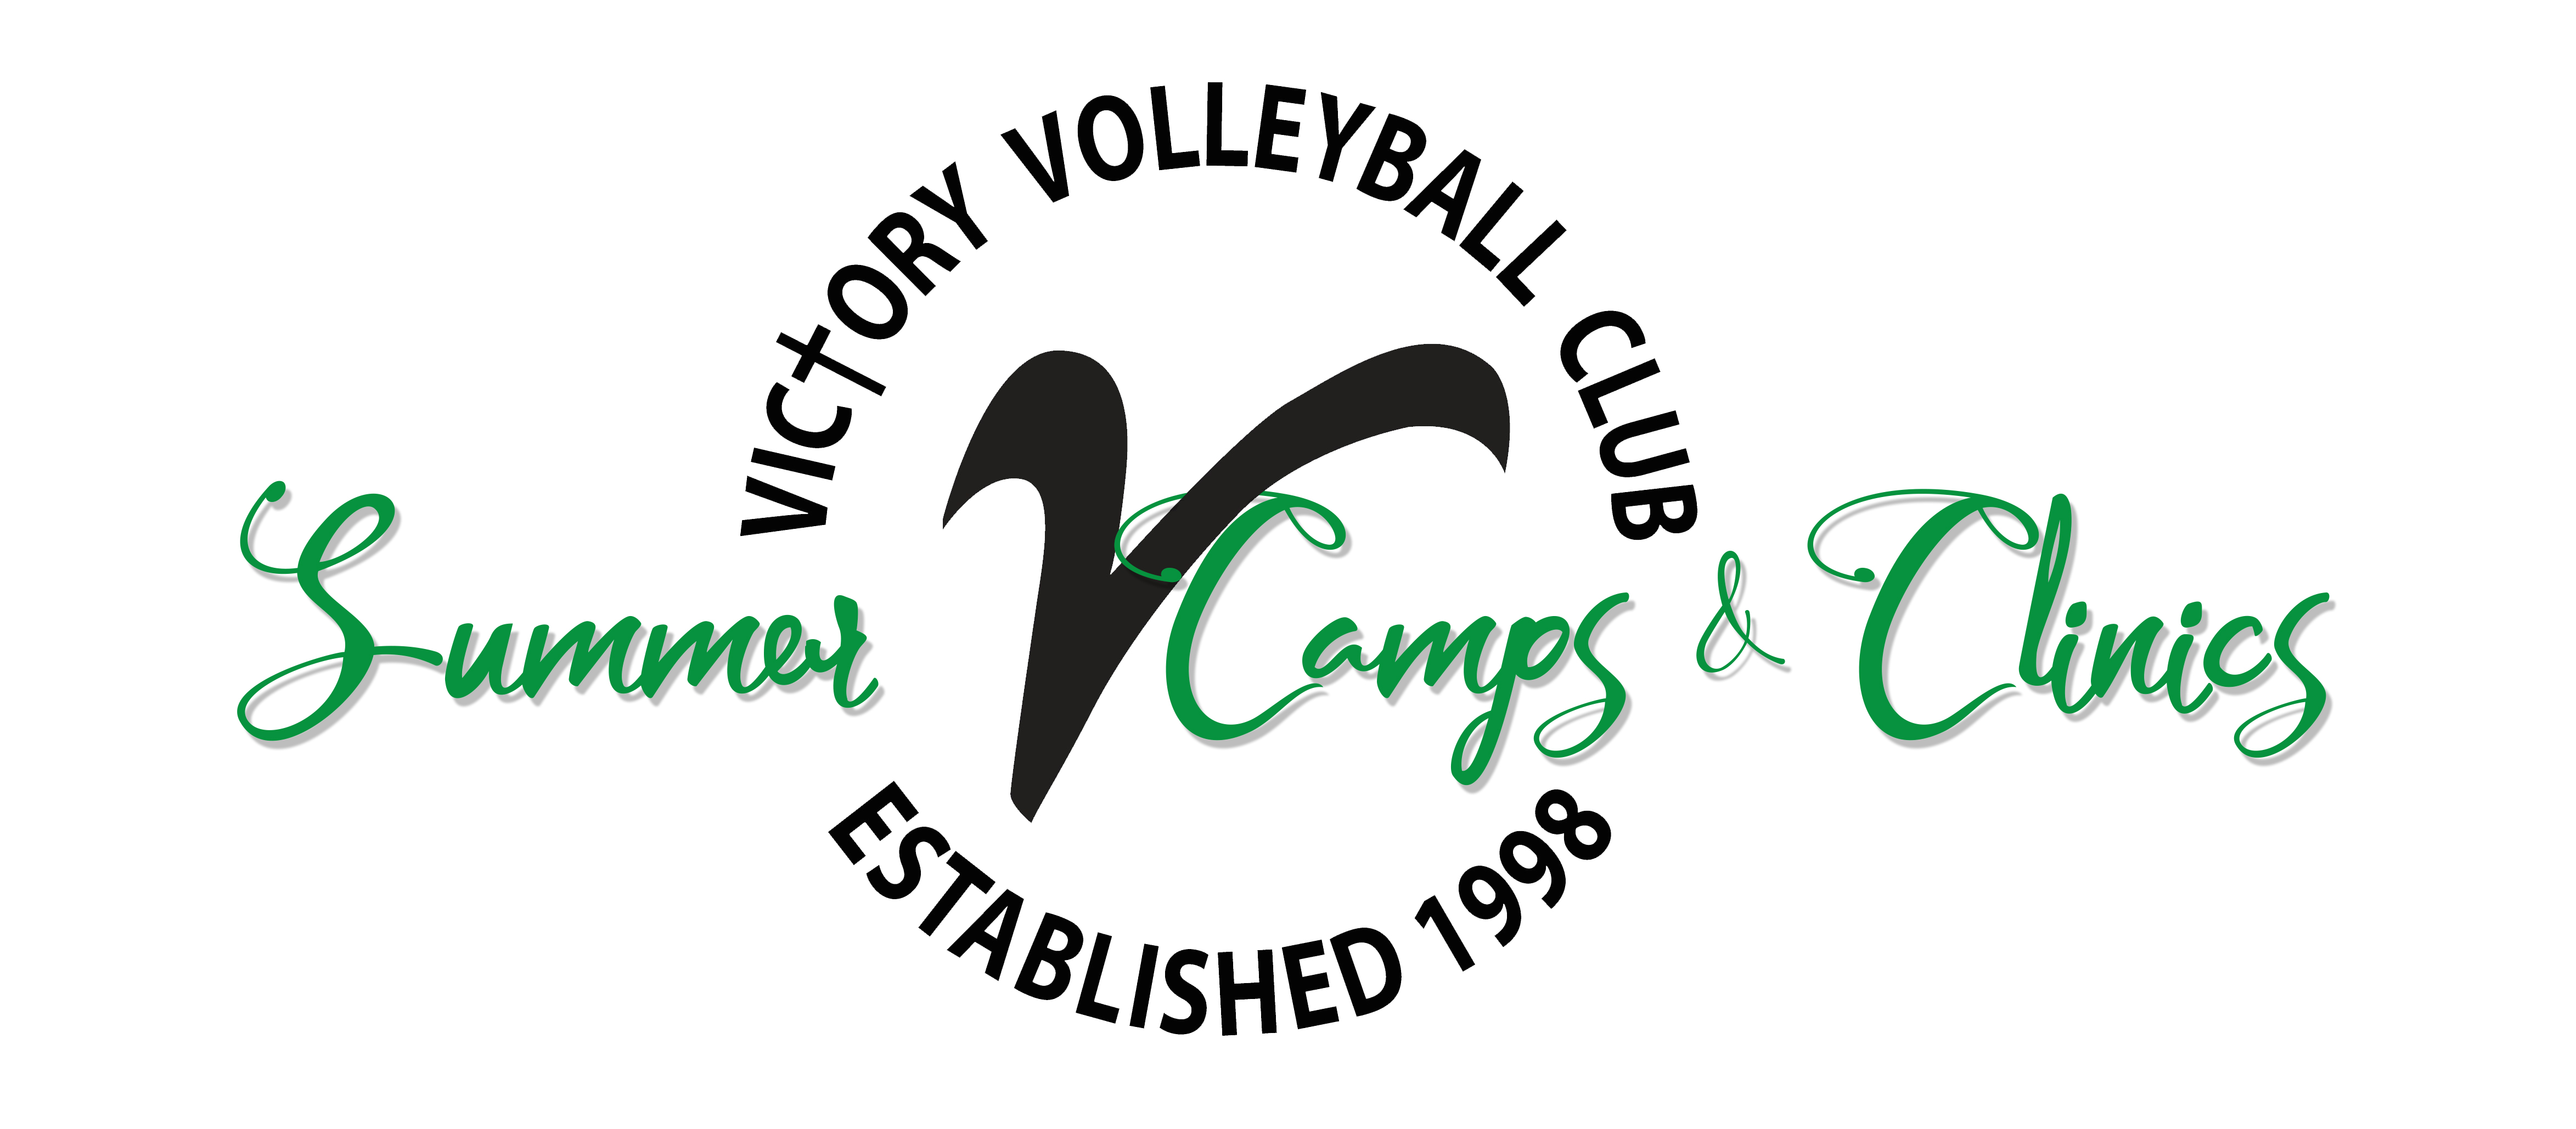 Victory camps and clinics